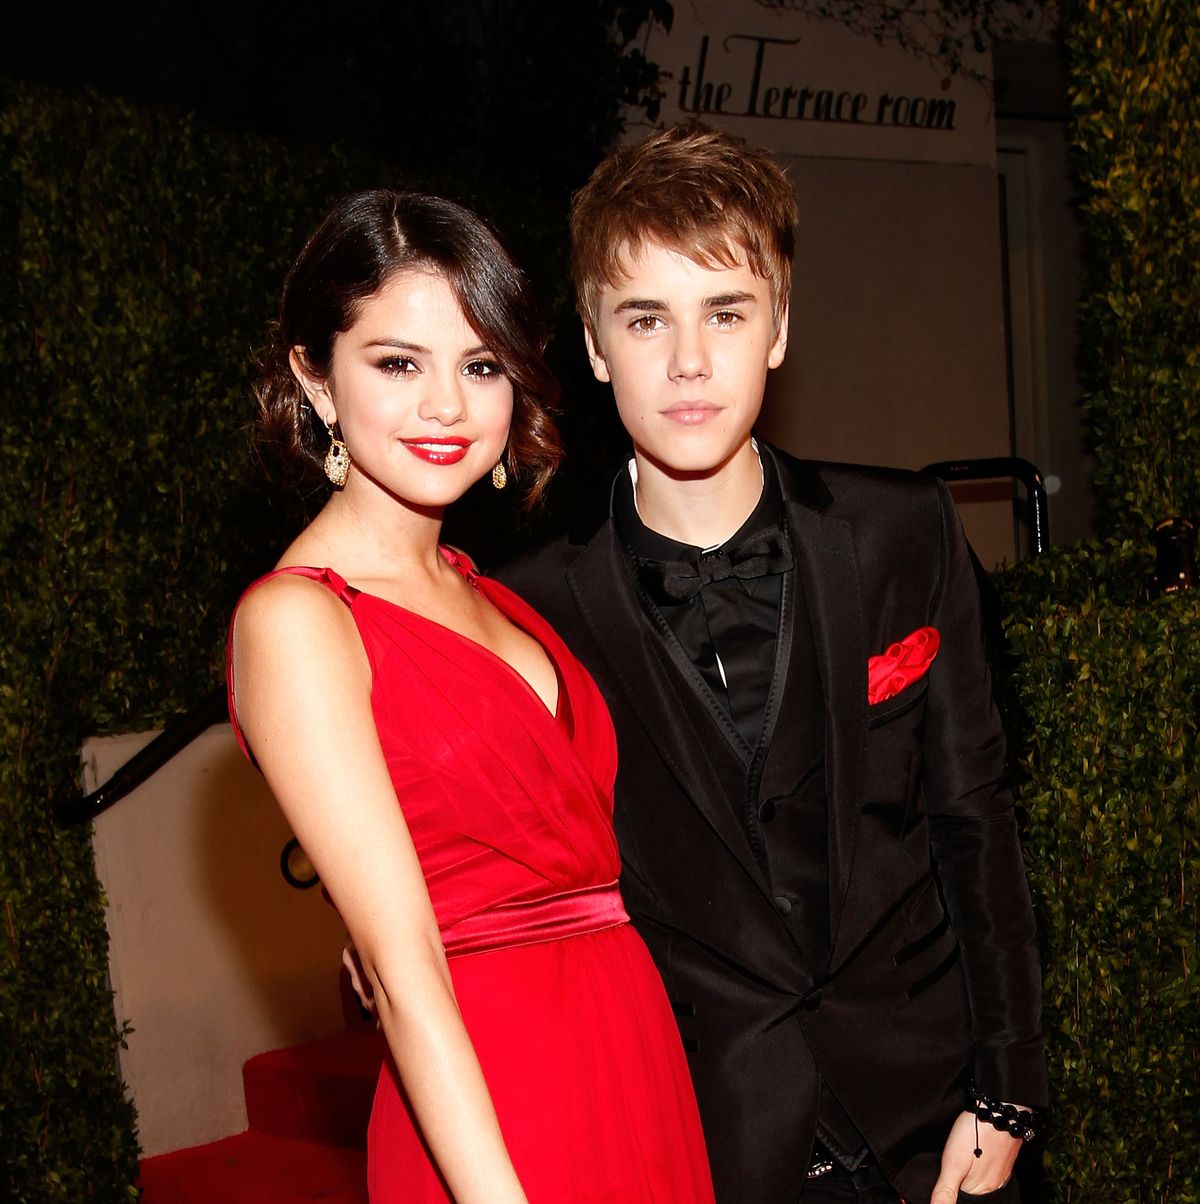 https://hips.hearstapps.com/hmg-prod/images/actress-selena-gomez-and-musician-justin-bieber-attend-the-news-photo-1582297312.jpg?crop=1.00xw:0.738xh;0,0.0672xh&resize=1200:*